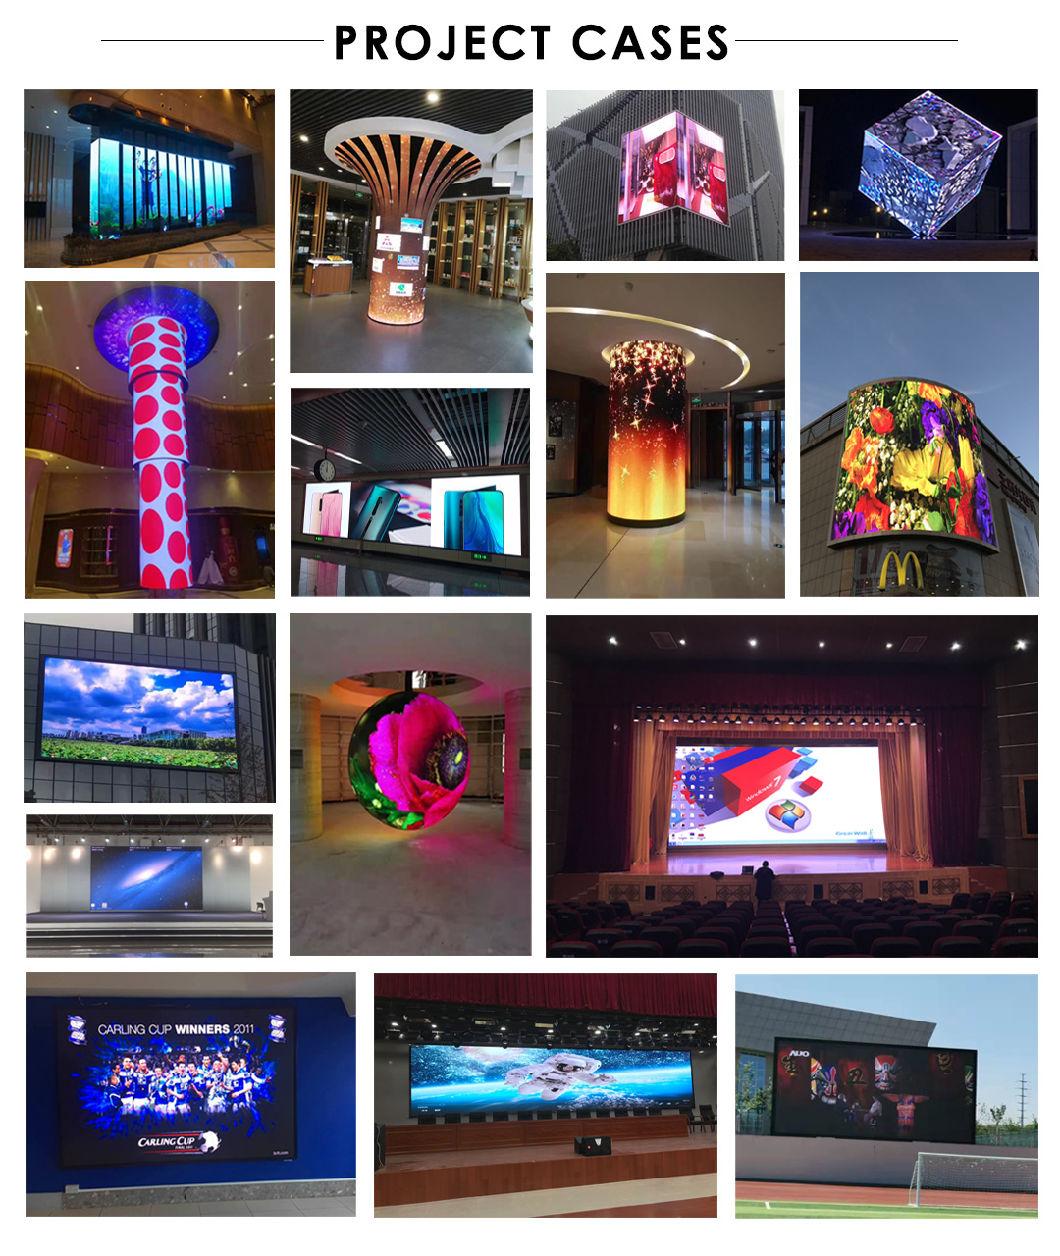 Full Color Urtal Definition LED Display Module Indoor Small Pixel Pitch LED Display Screen P1.86